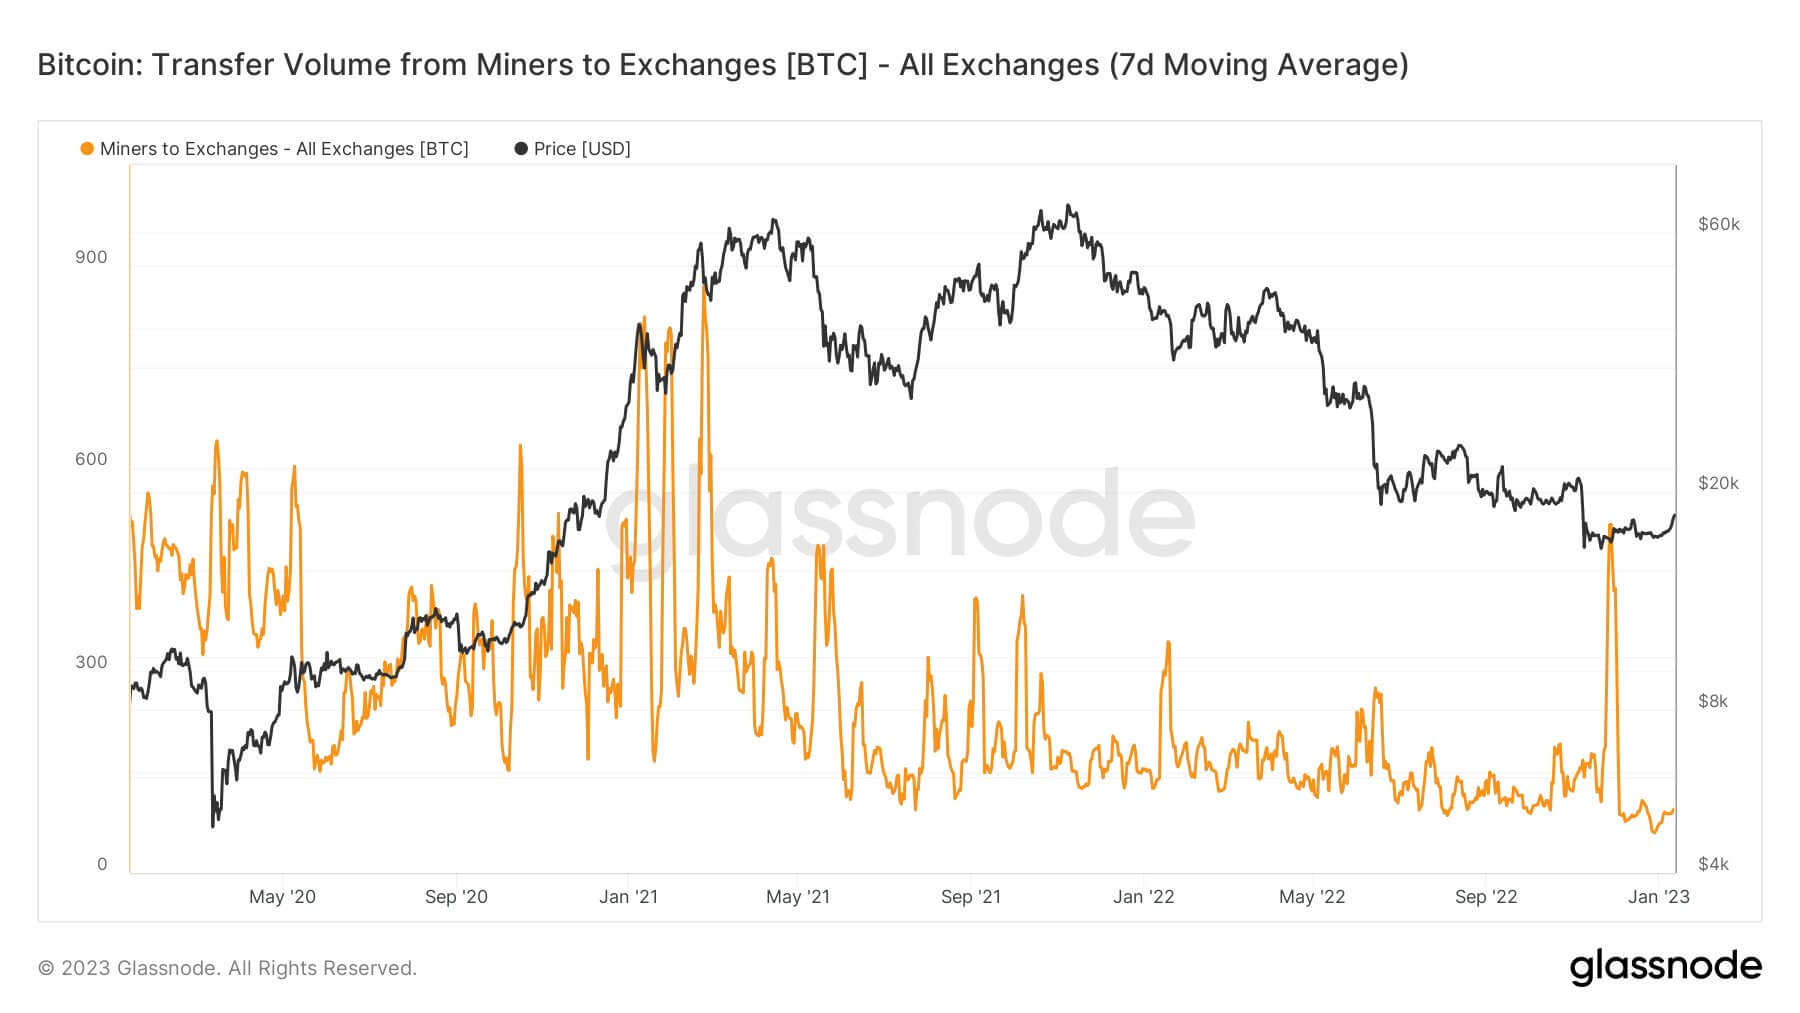 Bitcoin: Miner-to-Exchange Transfer Volume (BTC) - All Exchanges (7-Day Moving Average)